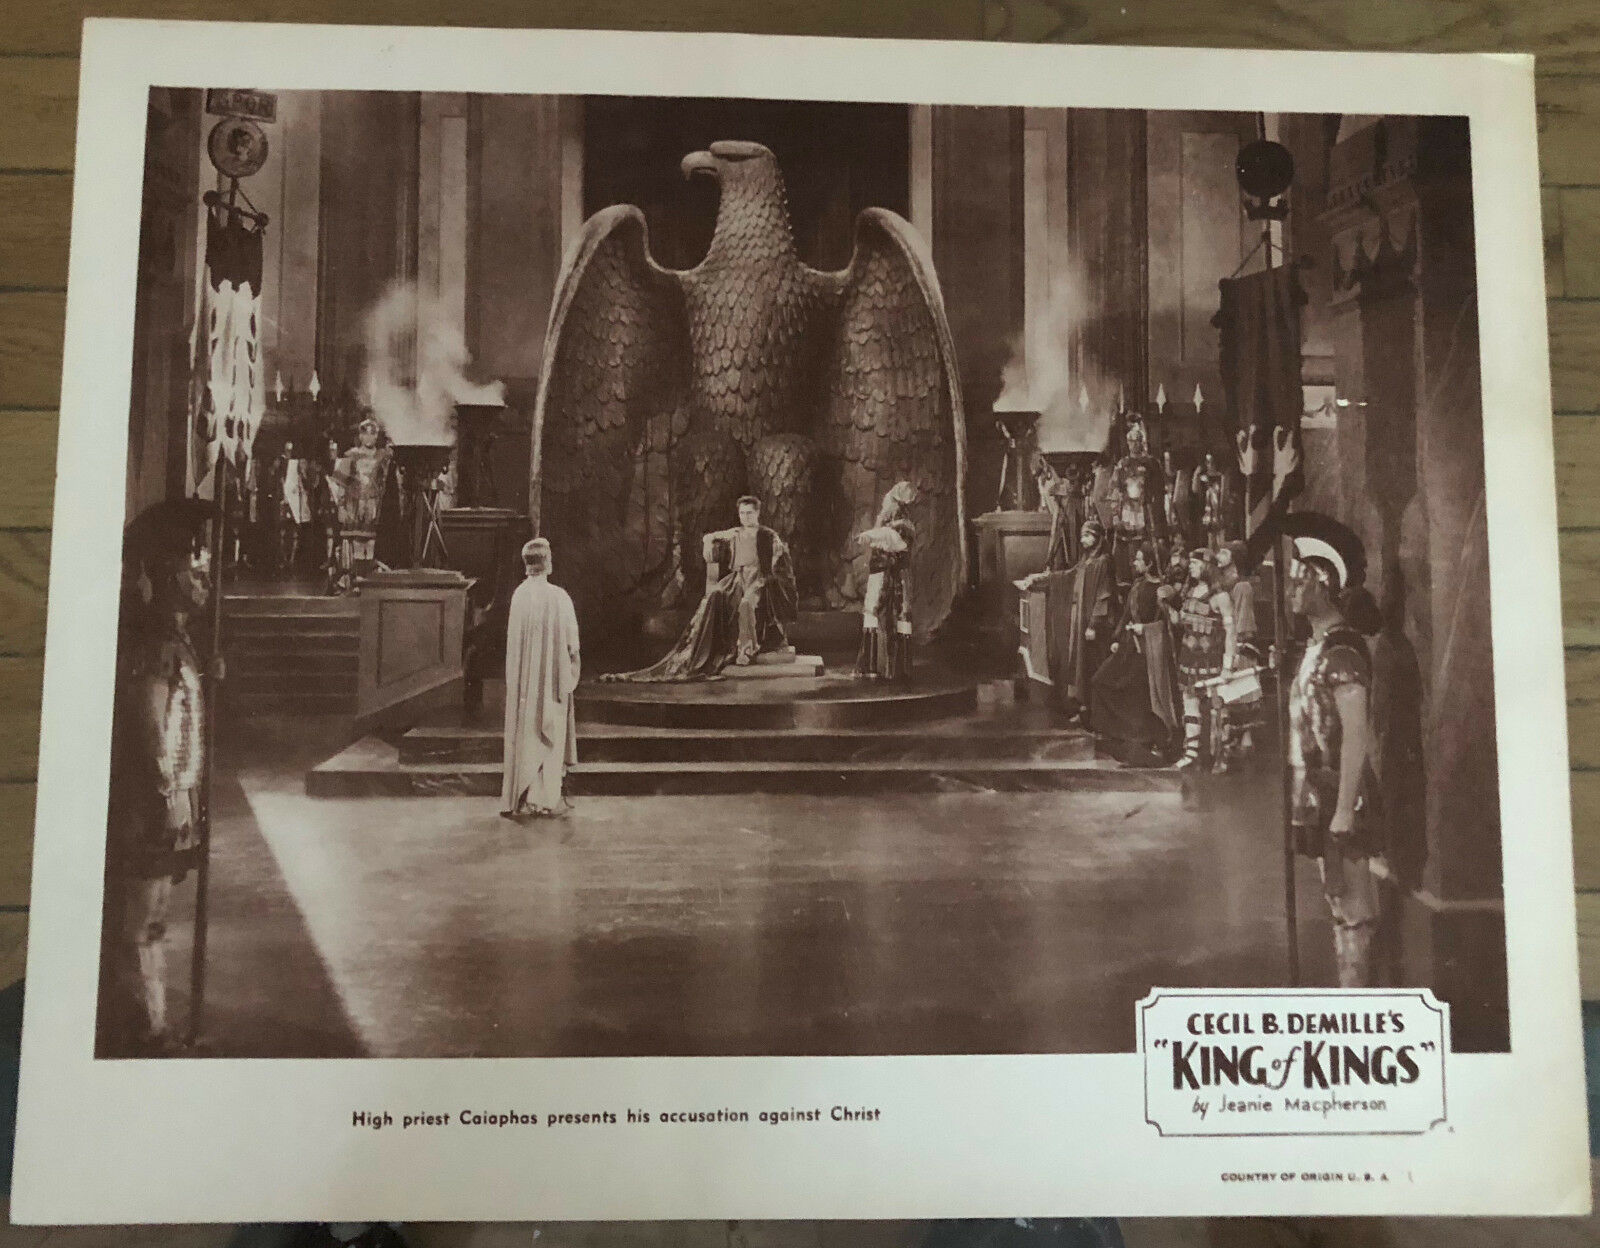 1927 King Of Kings By Cecil B Demille Lobby Card High Priest Caiaphos